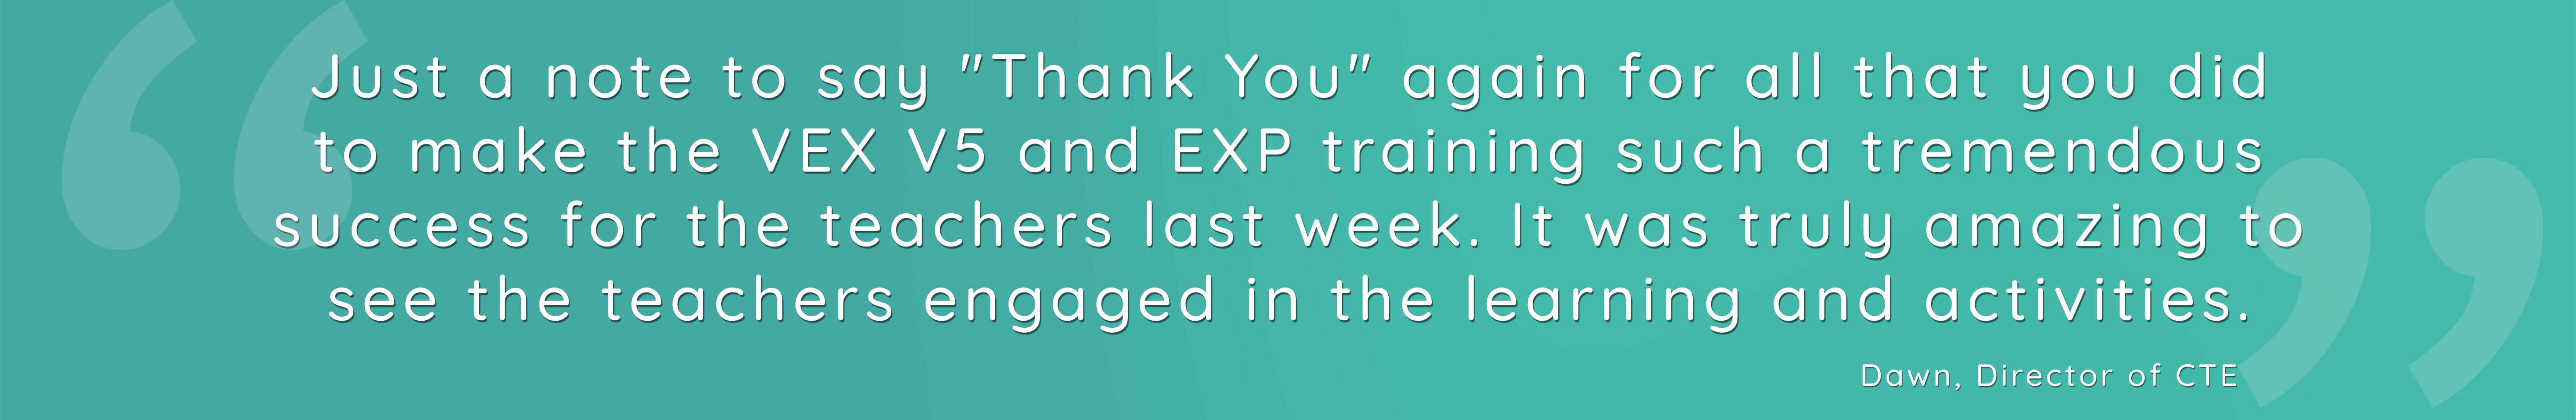 Just a note to say "Thank You" again for all that you did to make the VEX V5 and EXP training such a tremendous success for the teachers last week. It was truly amazing to see the teachers engaged in the learning and activities.